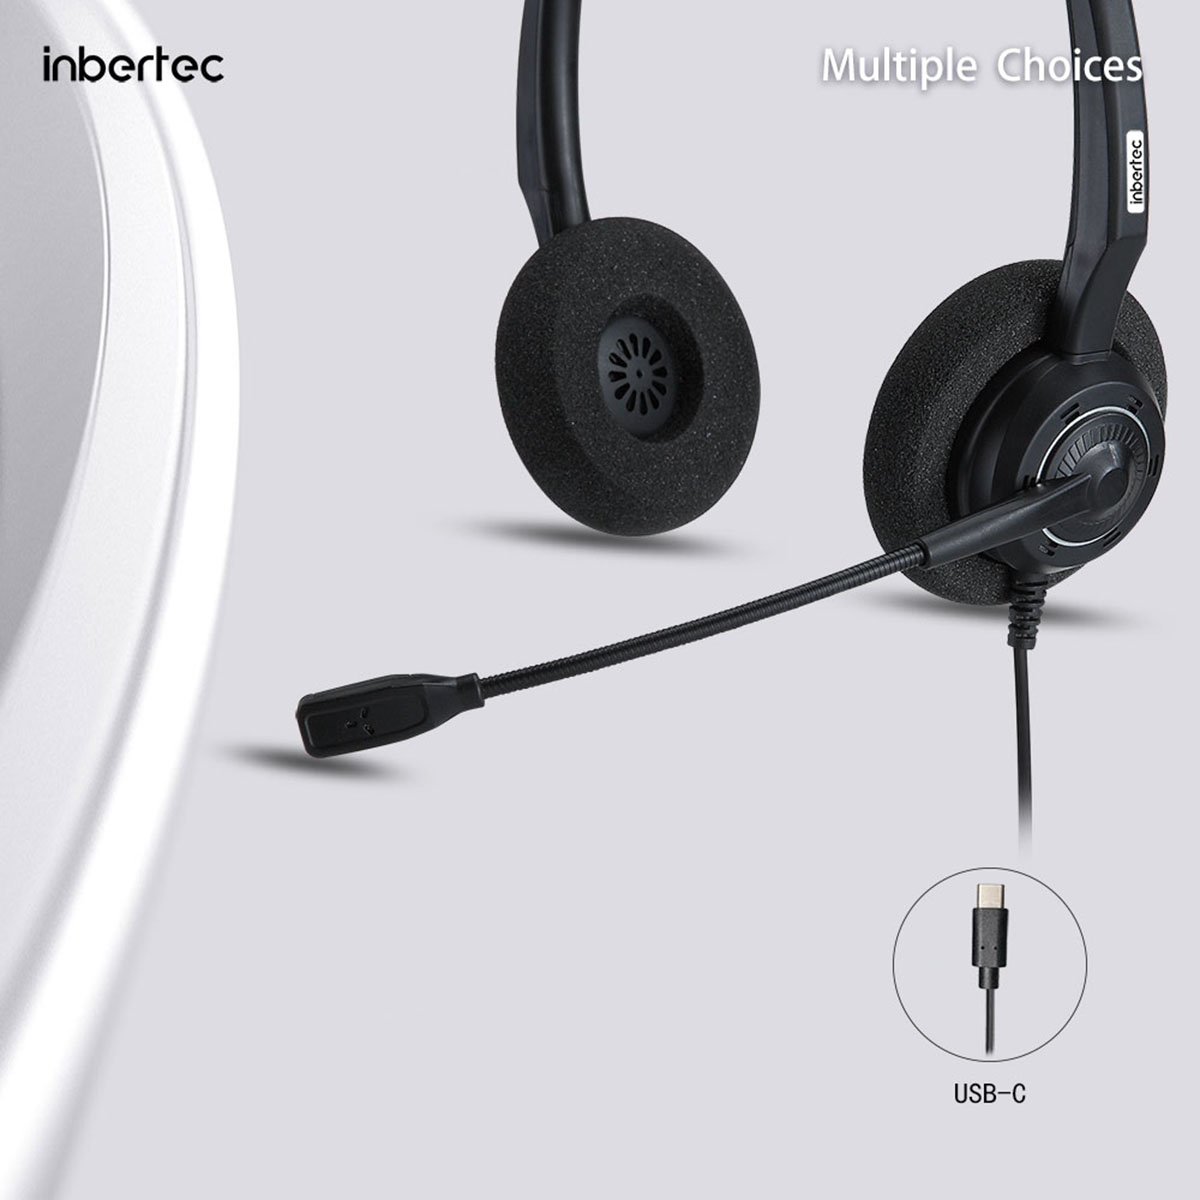 Entry Level USB Headset for Contact Center (6)